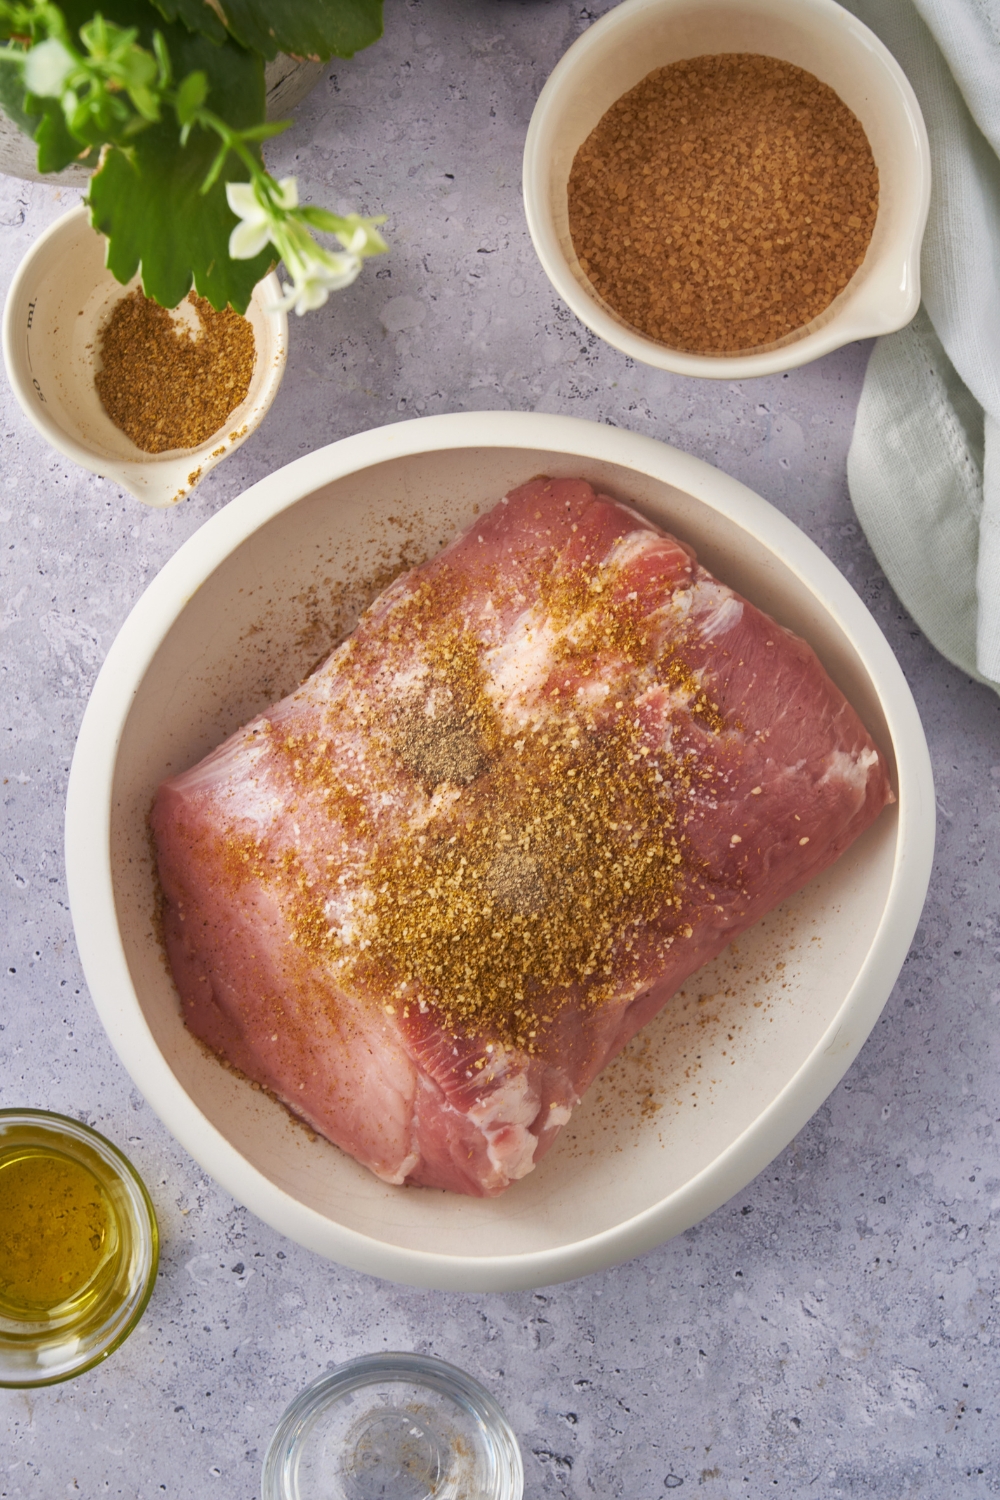 Raw pork shoulder in a bowl covered in a spice rub that has not yet been rubbed into the meat.